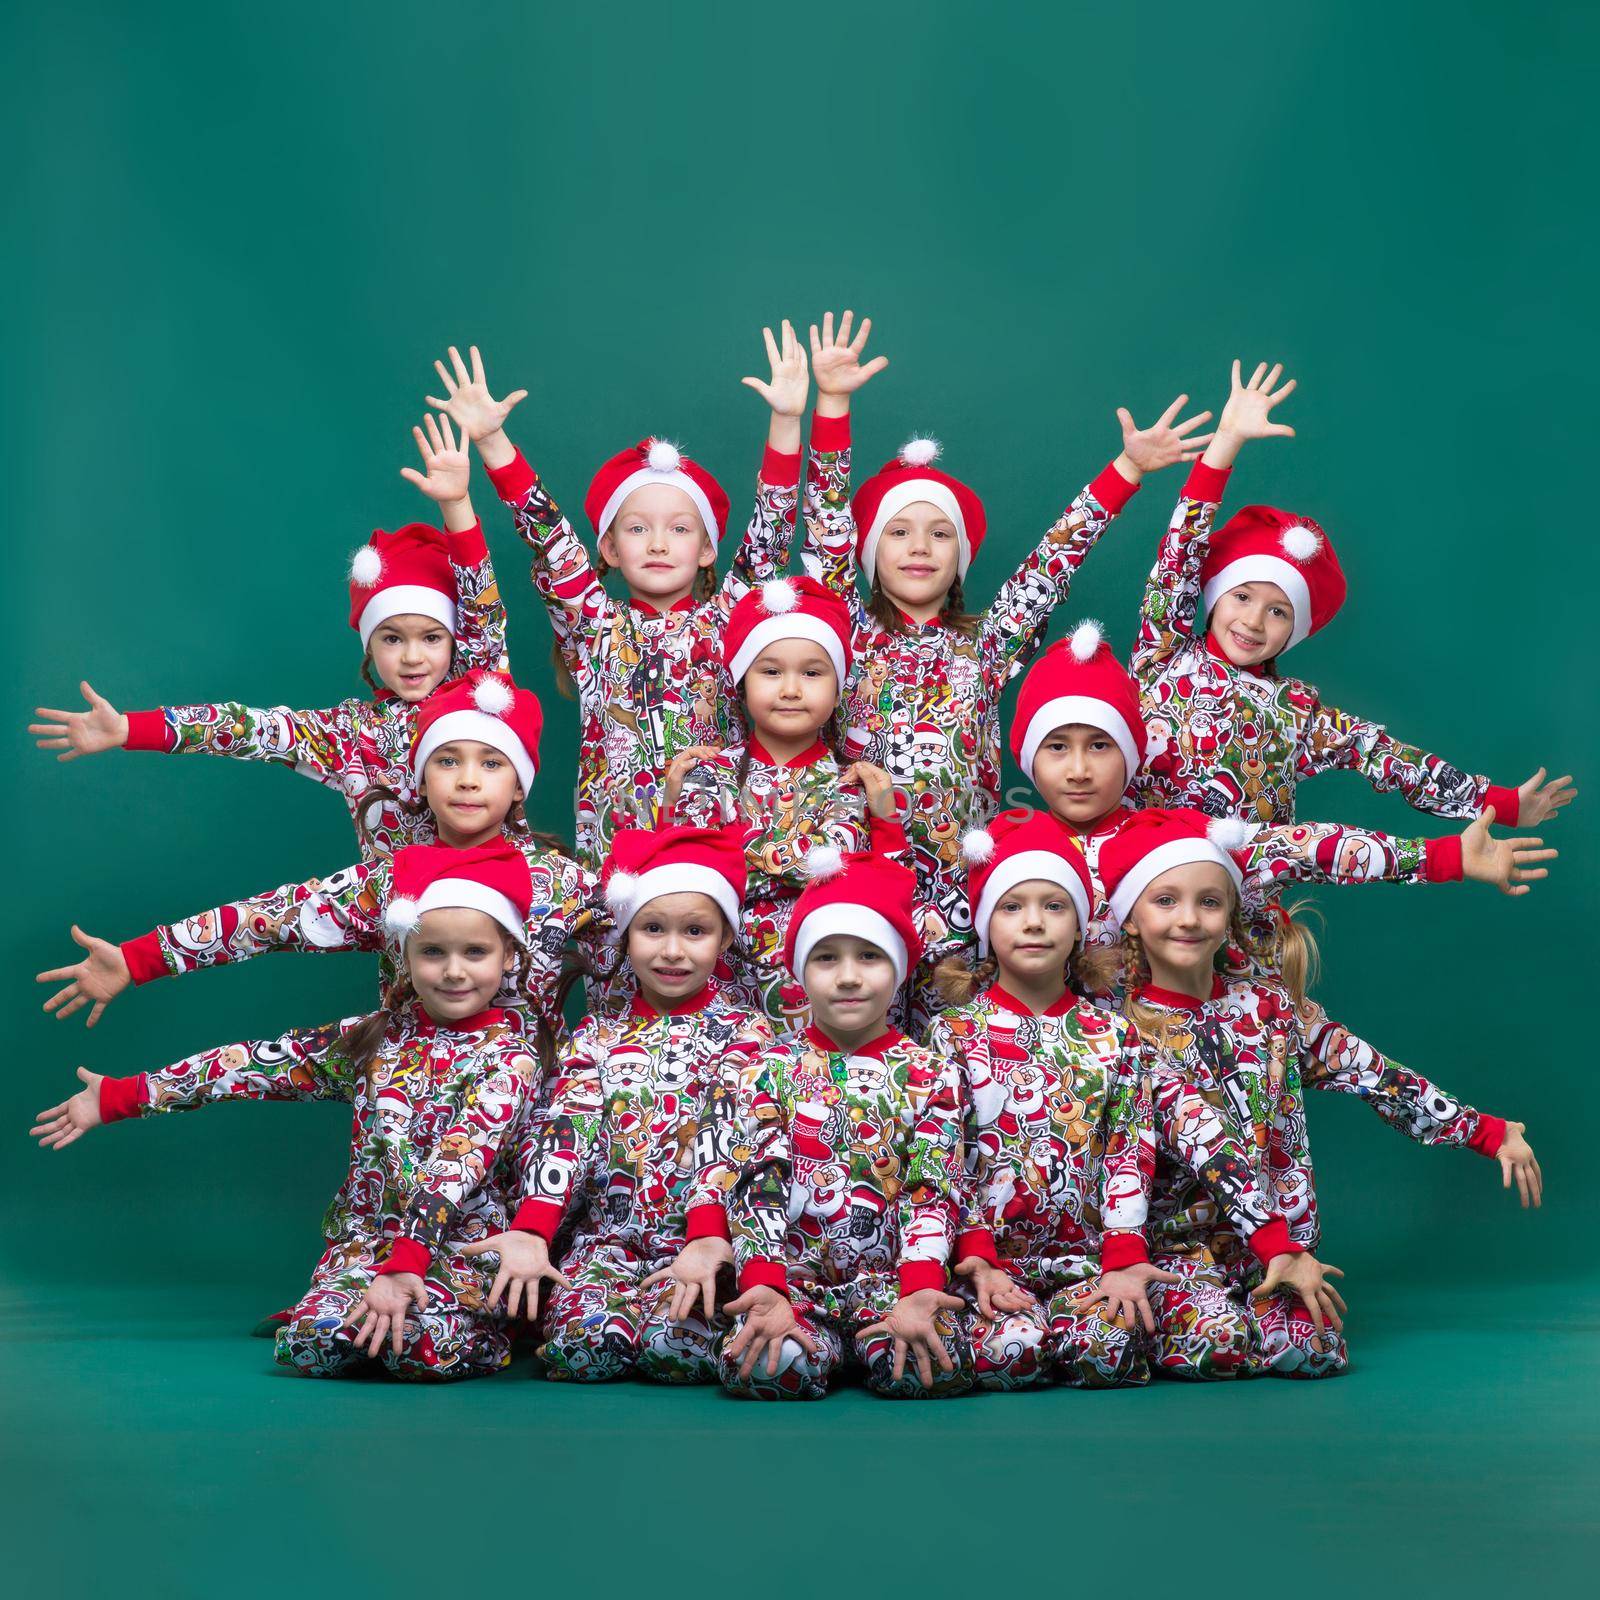 Group of kids posing with their hands outstretched by kolesnikov_studio